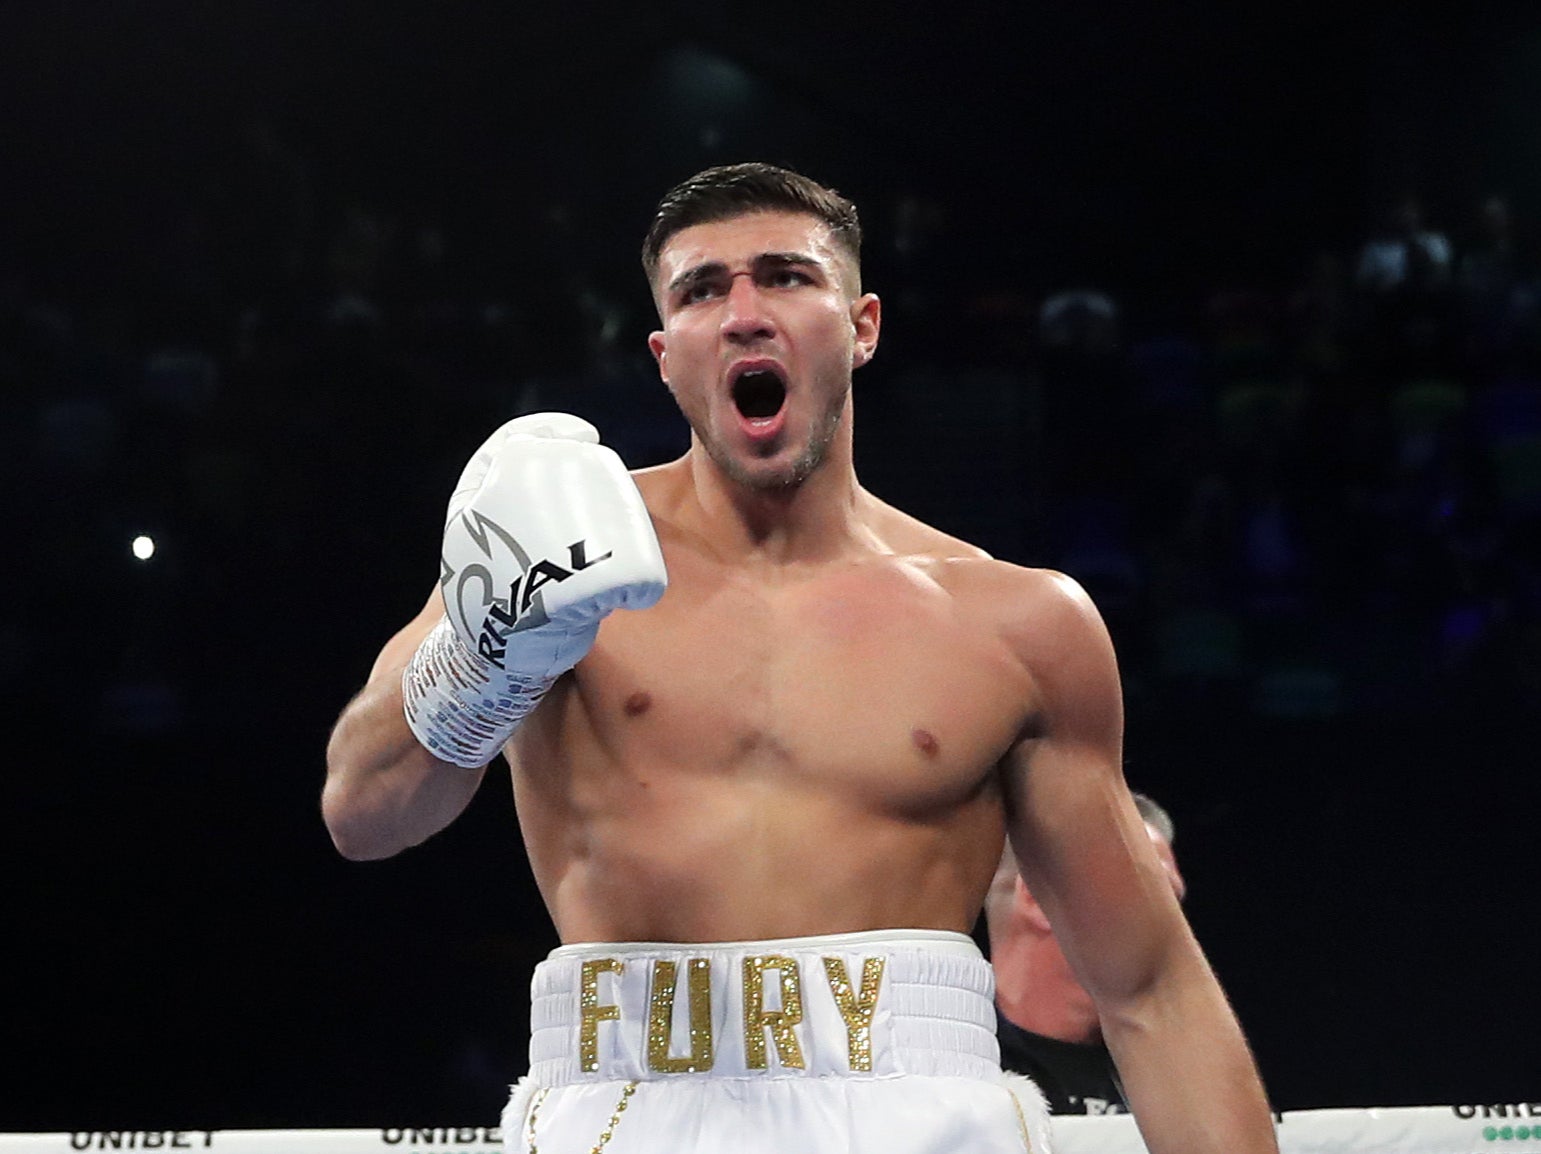 Tommy Fury has a 5-0 record in professional bouts